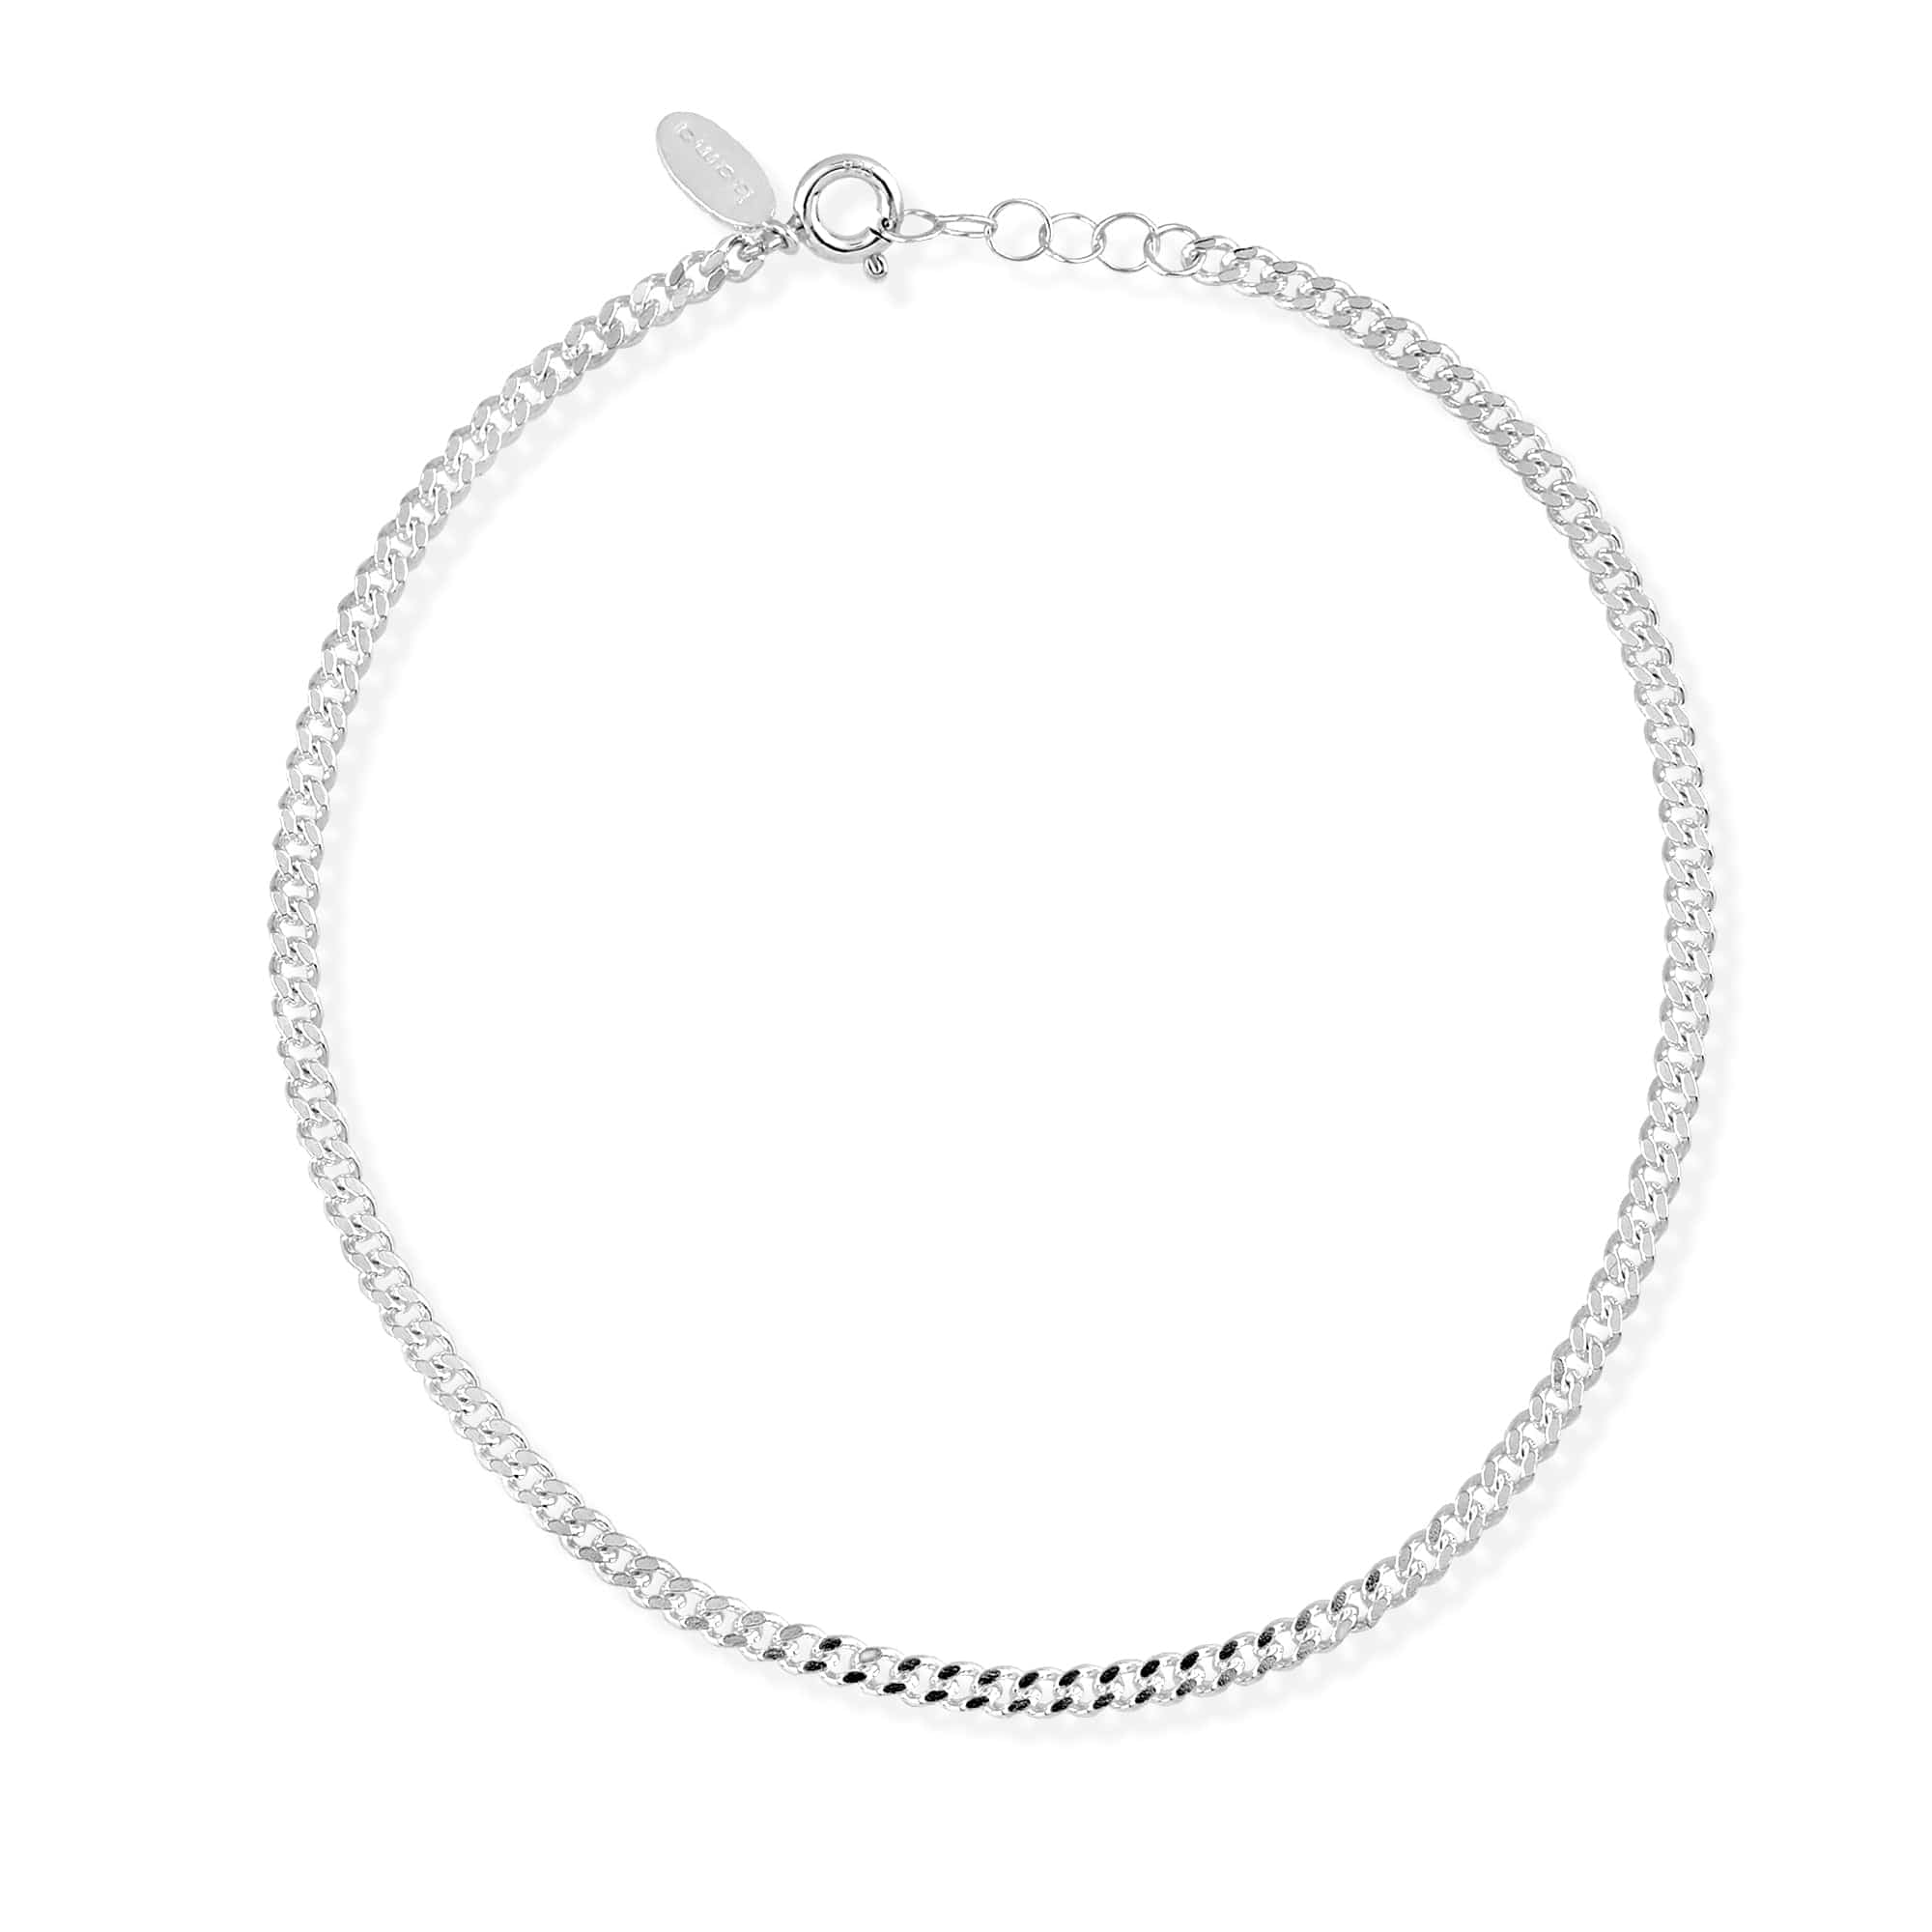 Boma Jewelry Anklets Curb Chain Anklet 9"